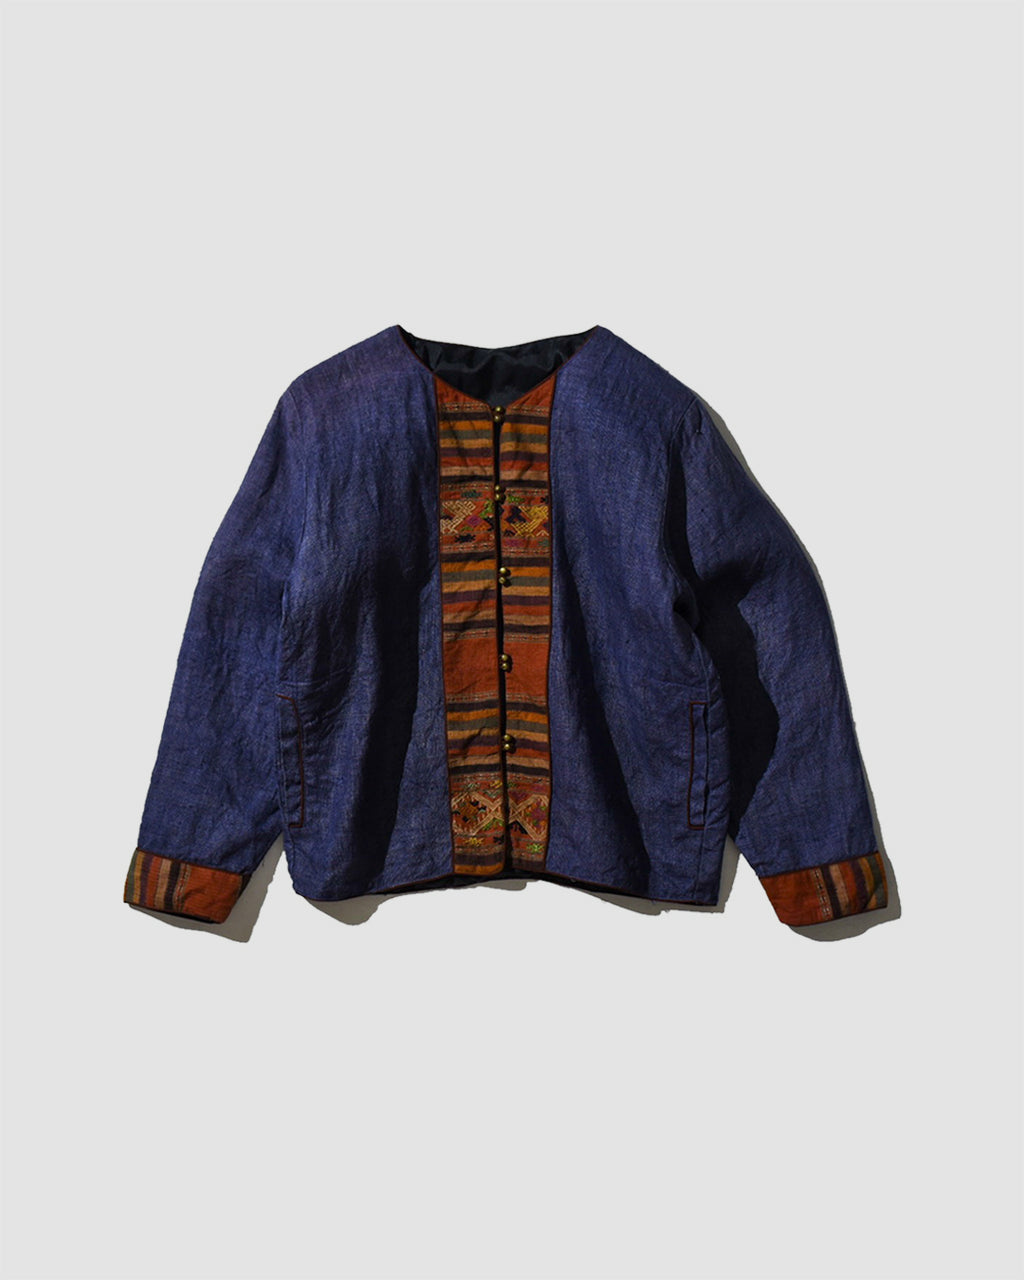 NATIVE TRIBAL COLLARLESS BELL BUTTONS JACKET - M/L